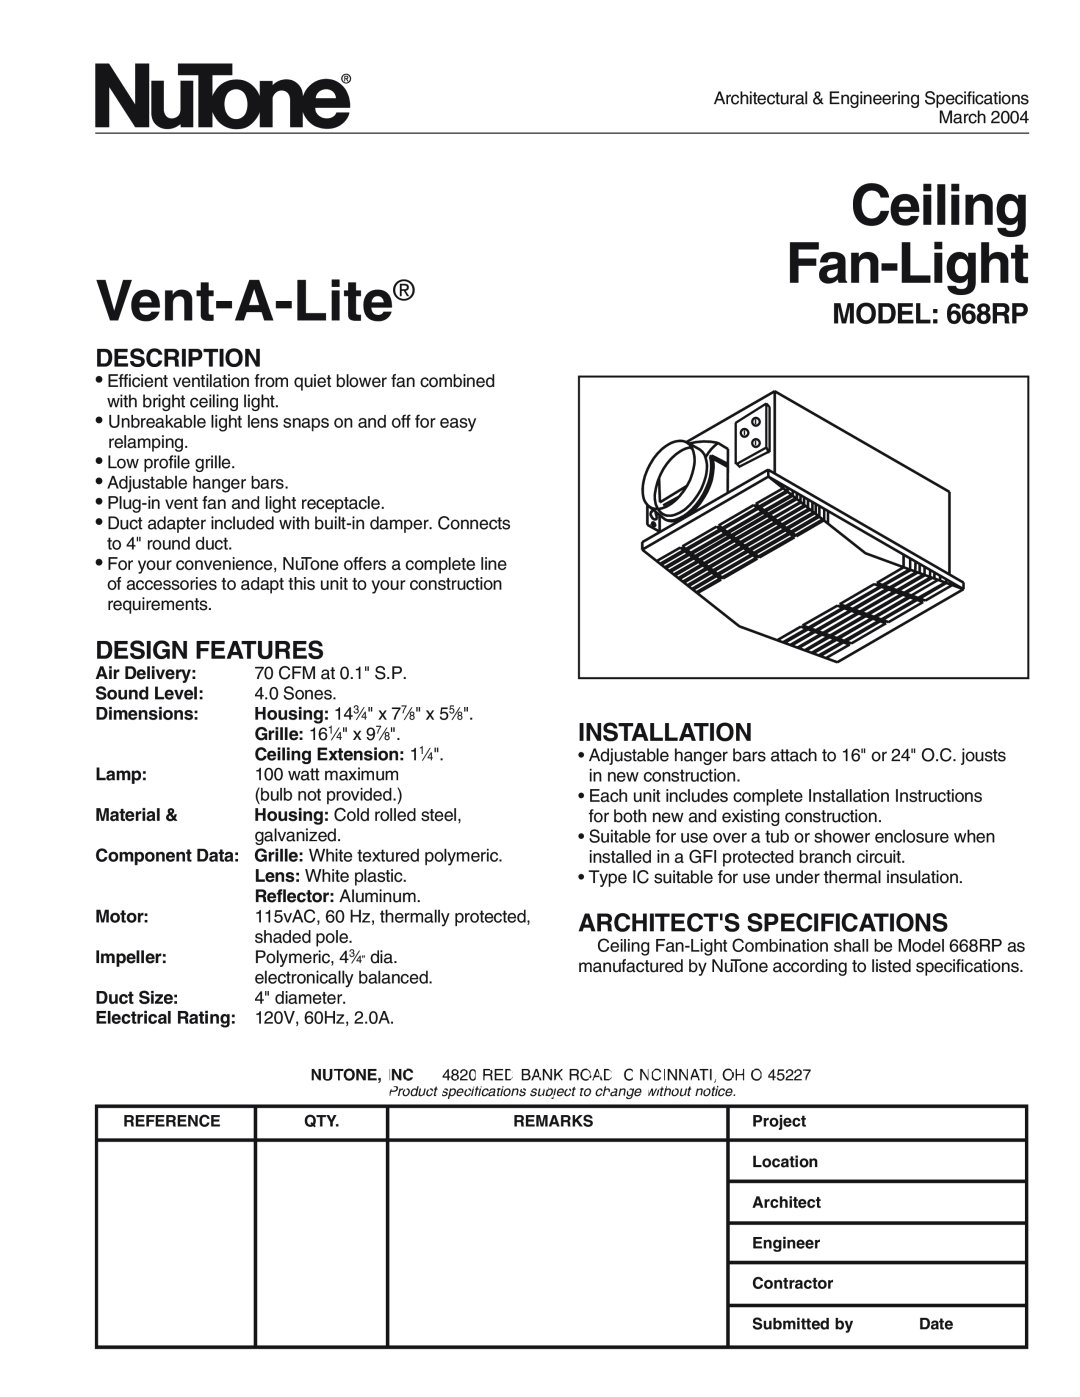 NuTone installation instructions Vent-Light Combination, MODEL 668RP, Important Safety Instructions 